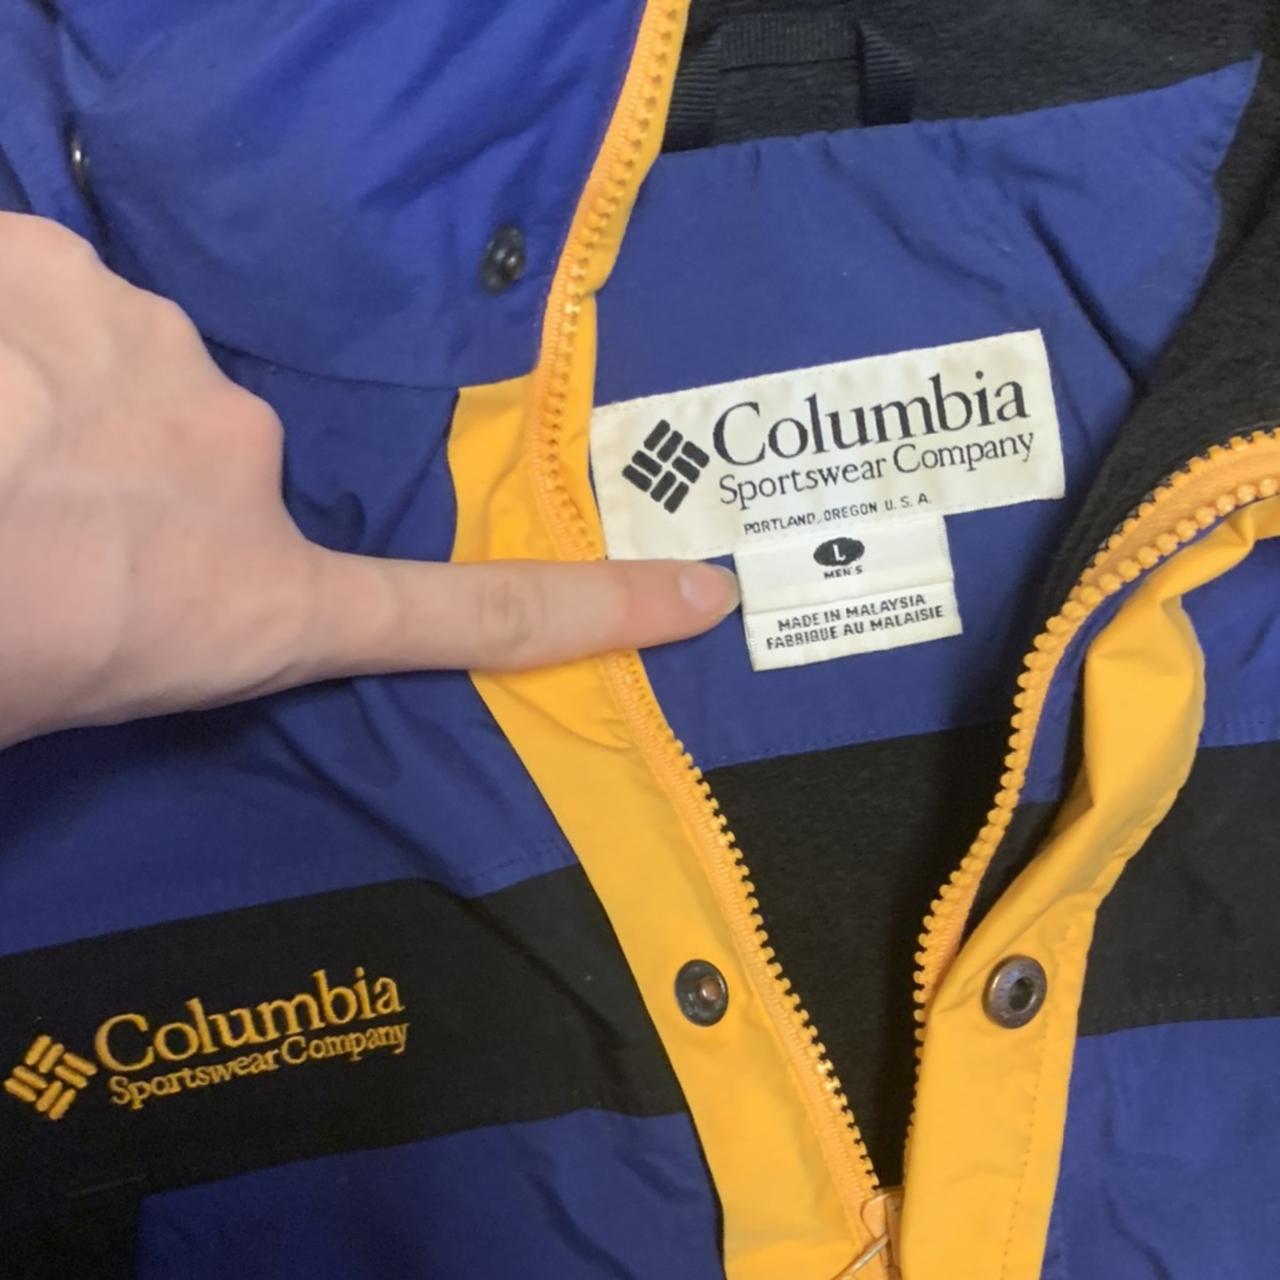 Product Image 2 - Columbia Vintage Omin-Tech jacket
those crazy